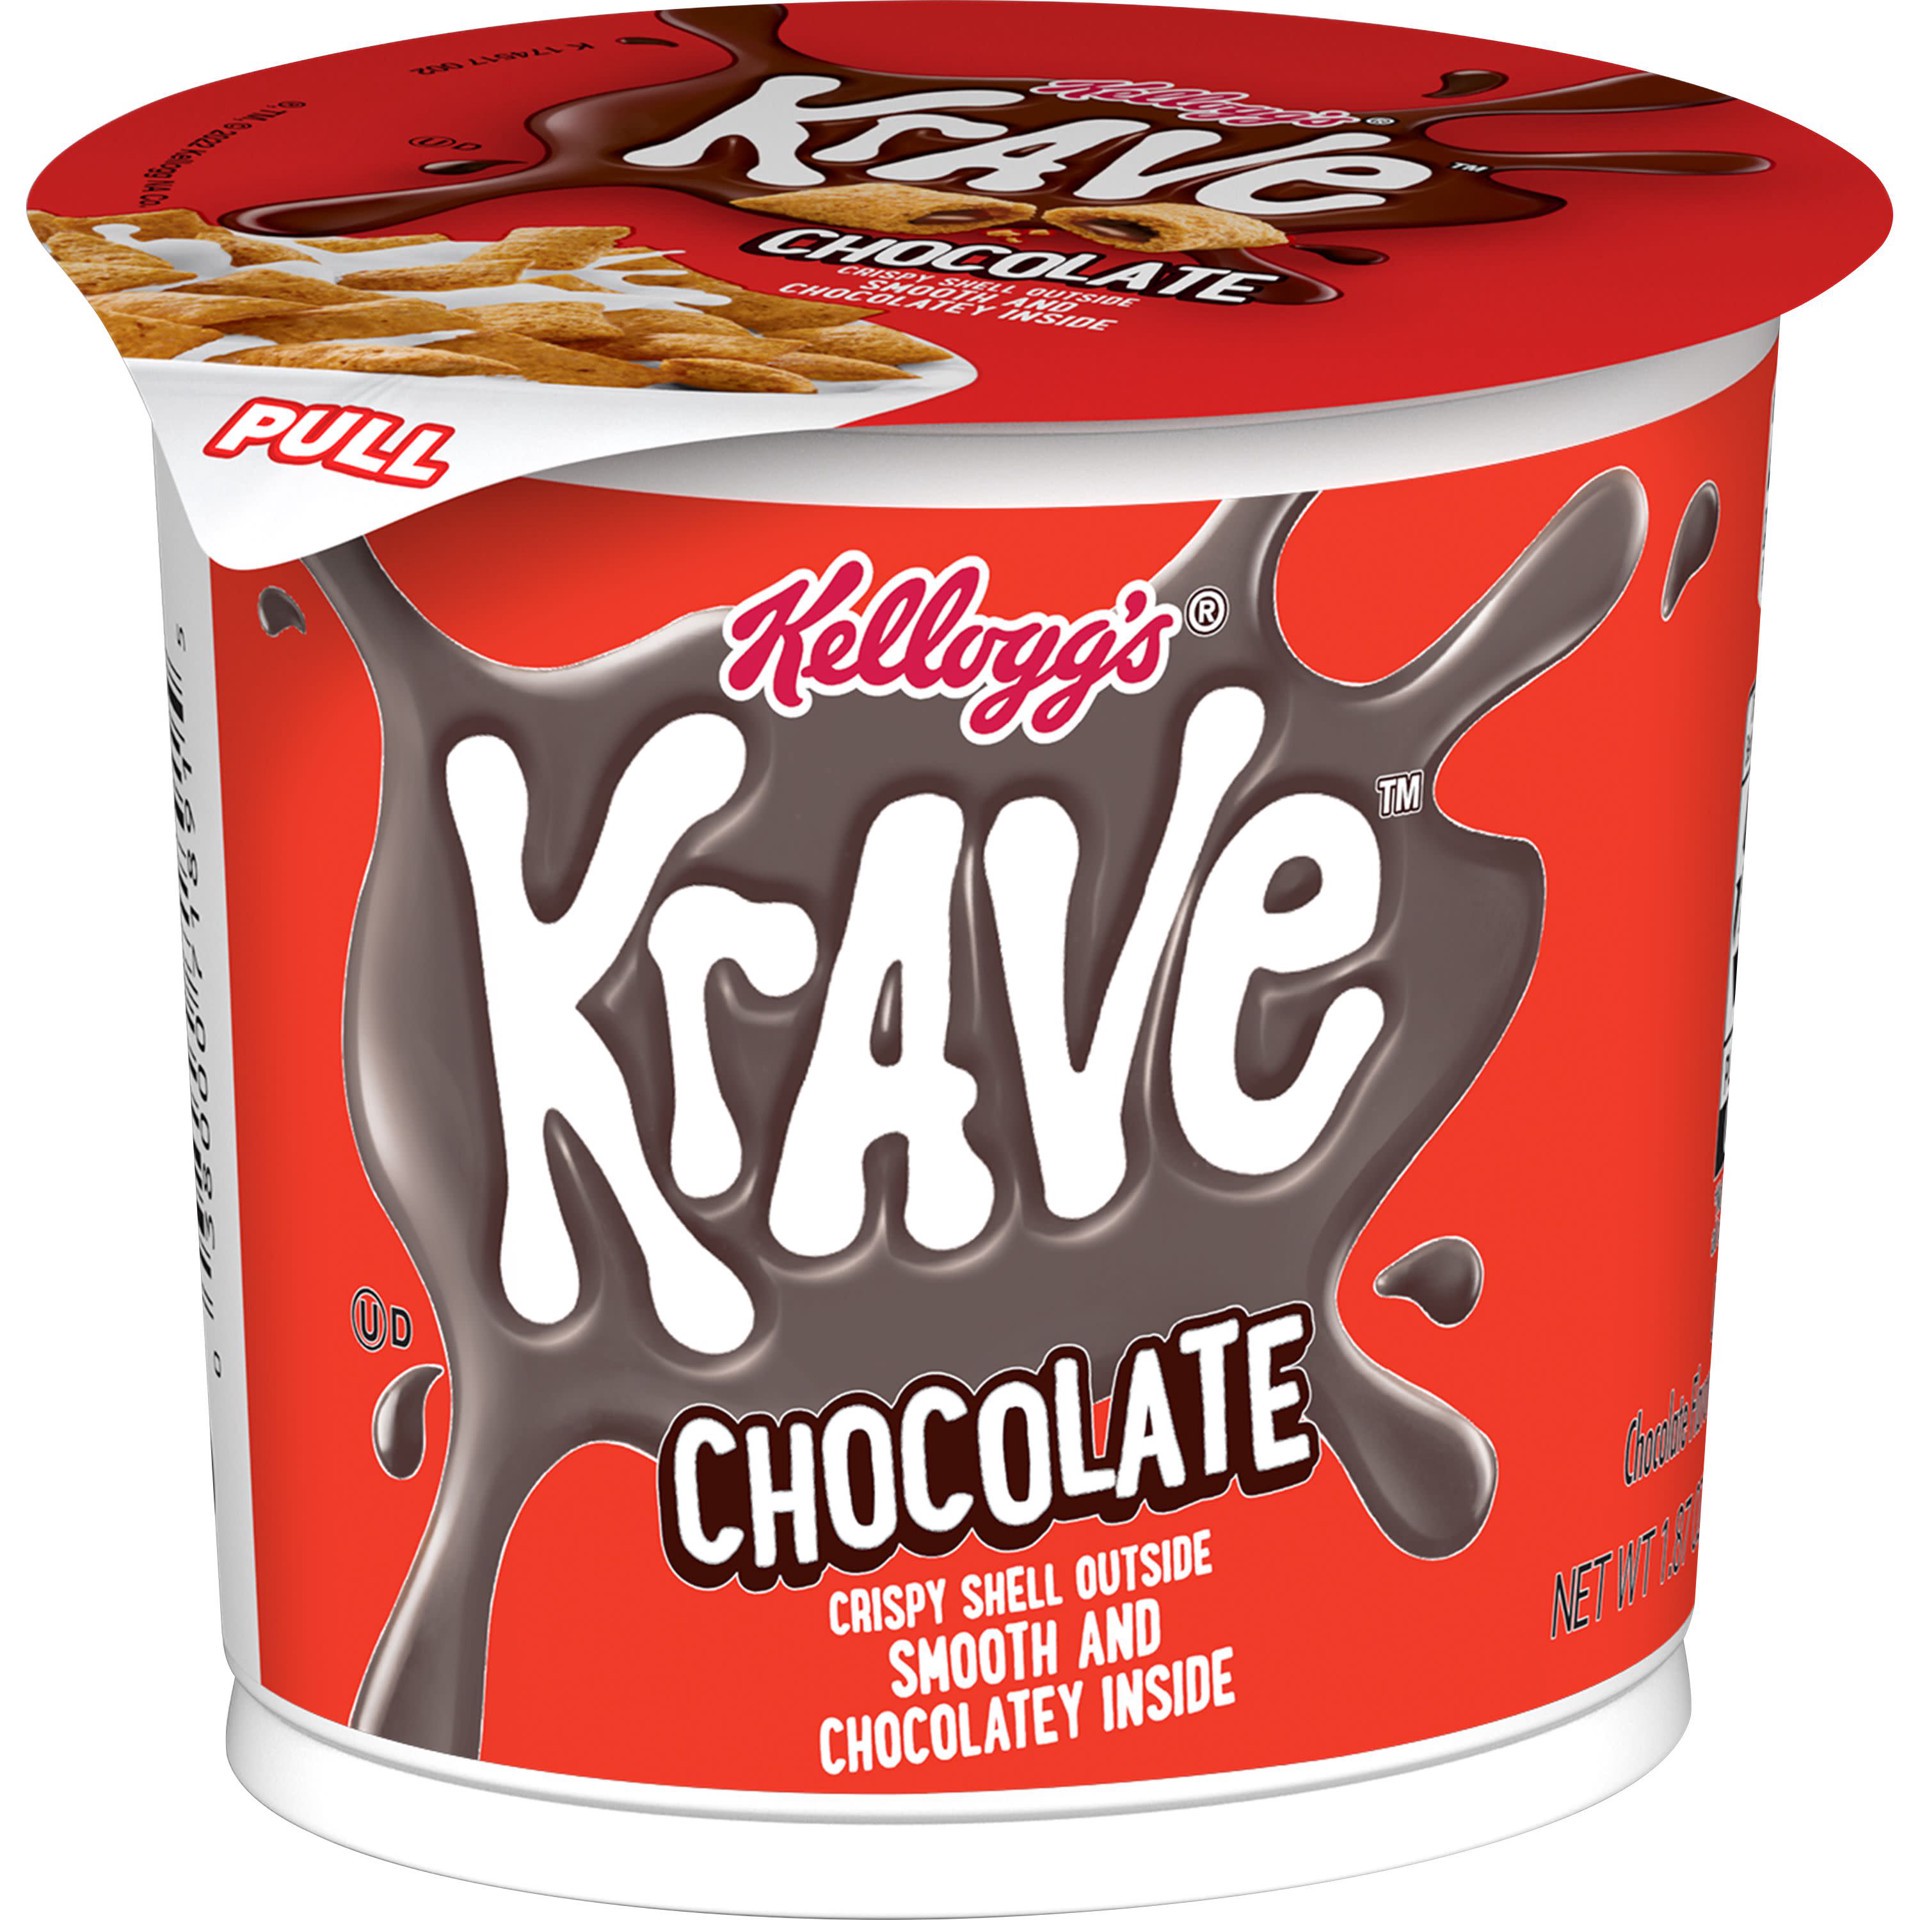 slide 1 of 6, Krave Kellogg's Krave Cold Breakfast Cereal Cup, 7 Vitamins and Minerals, Kids Snacks, Chocolate, 1.87oz Cup, 1 Cup, 1.87 oz